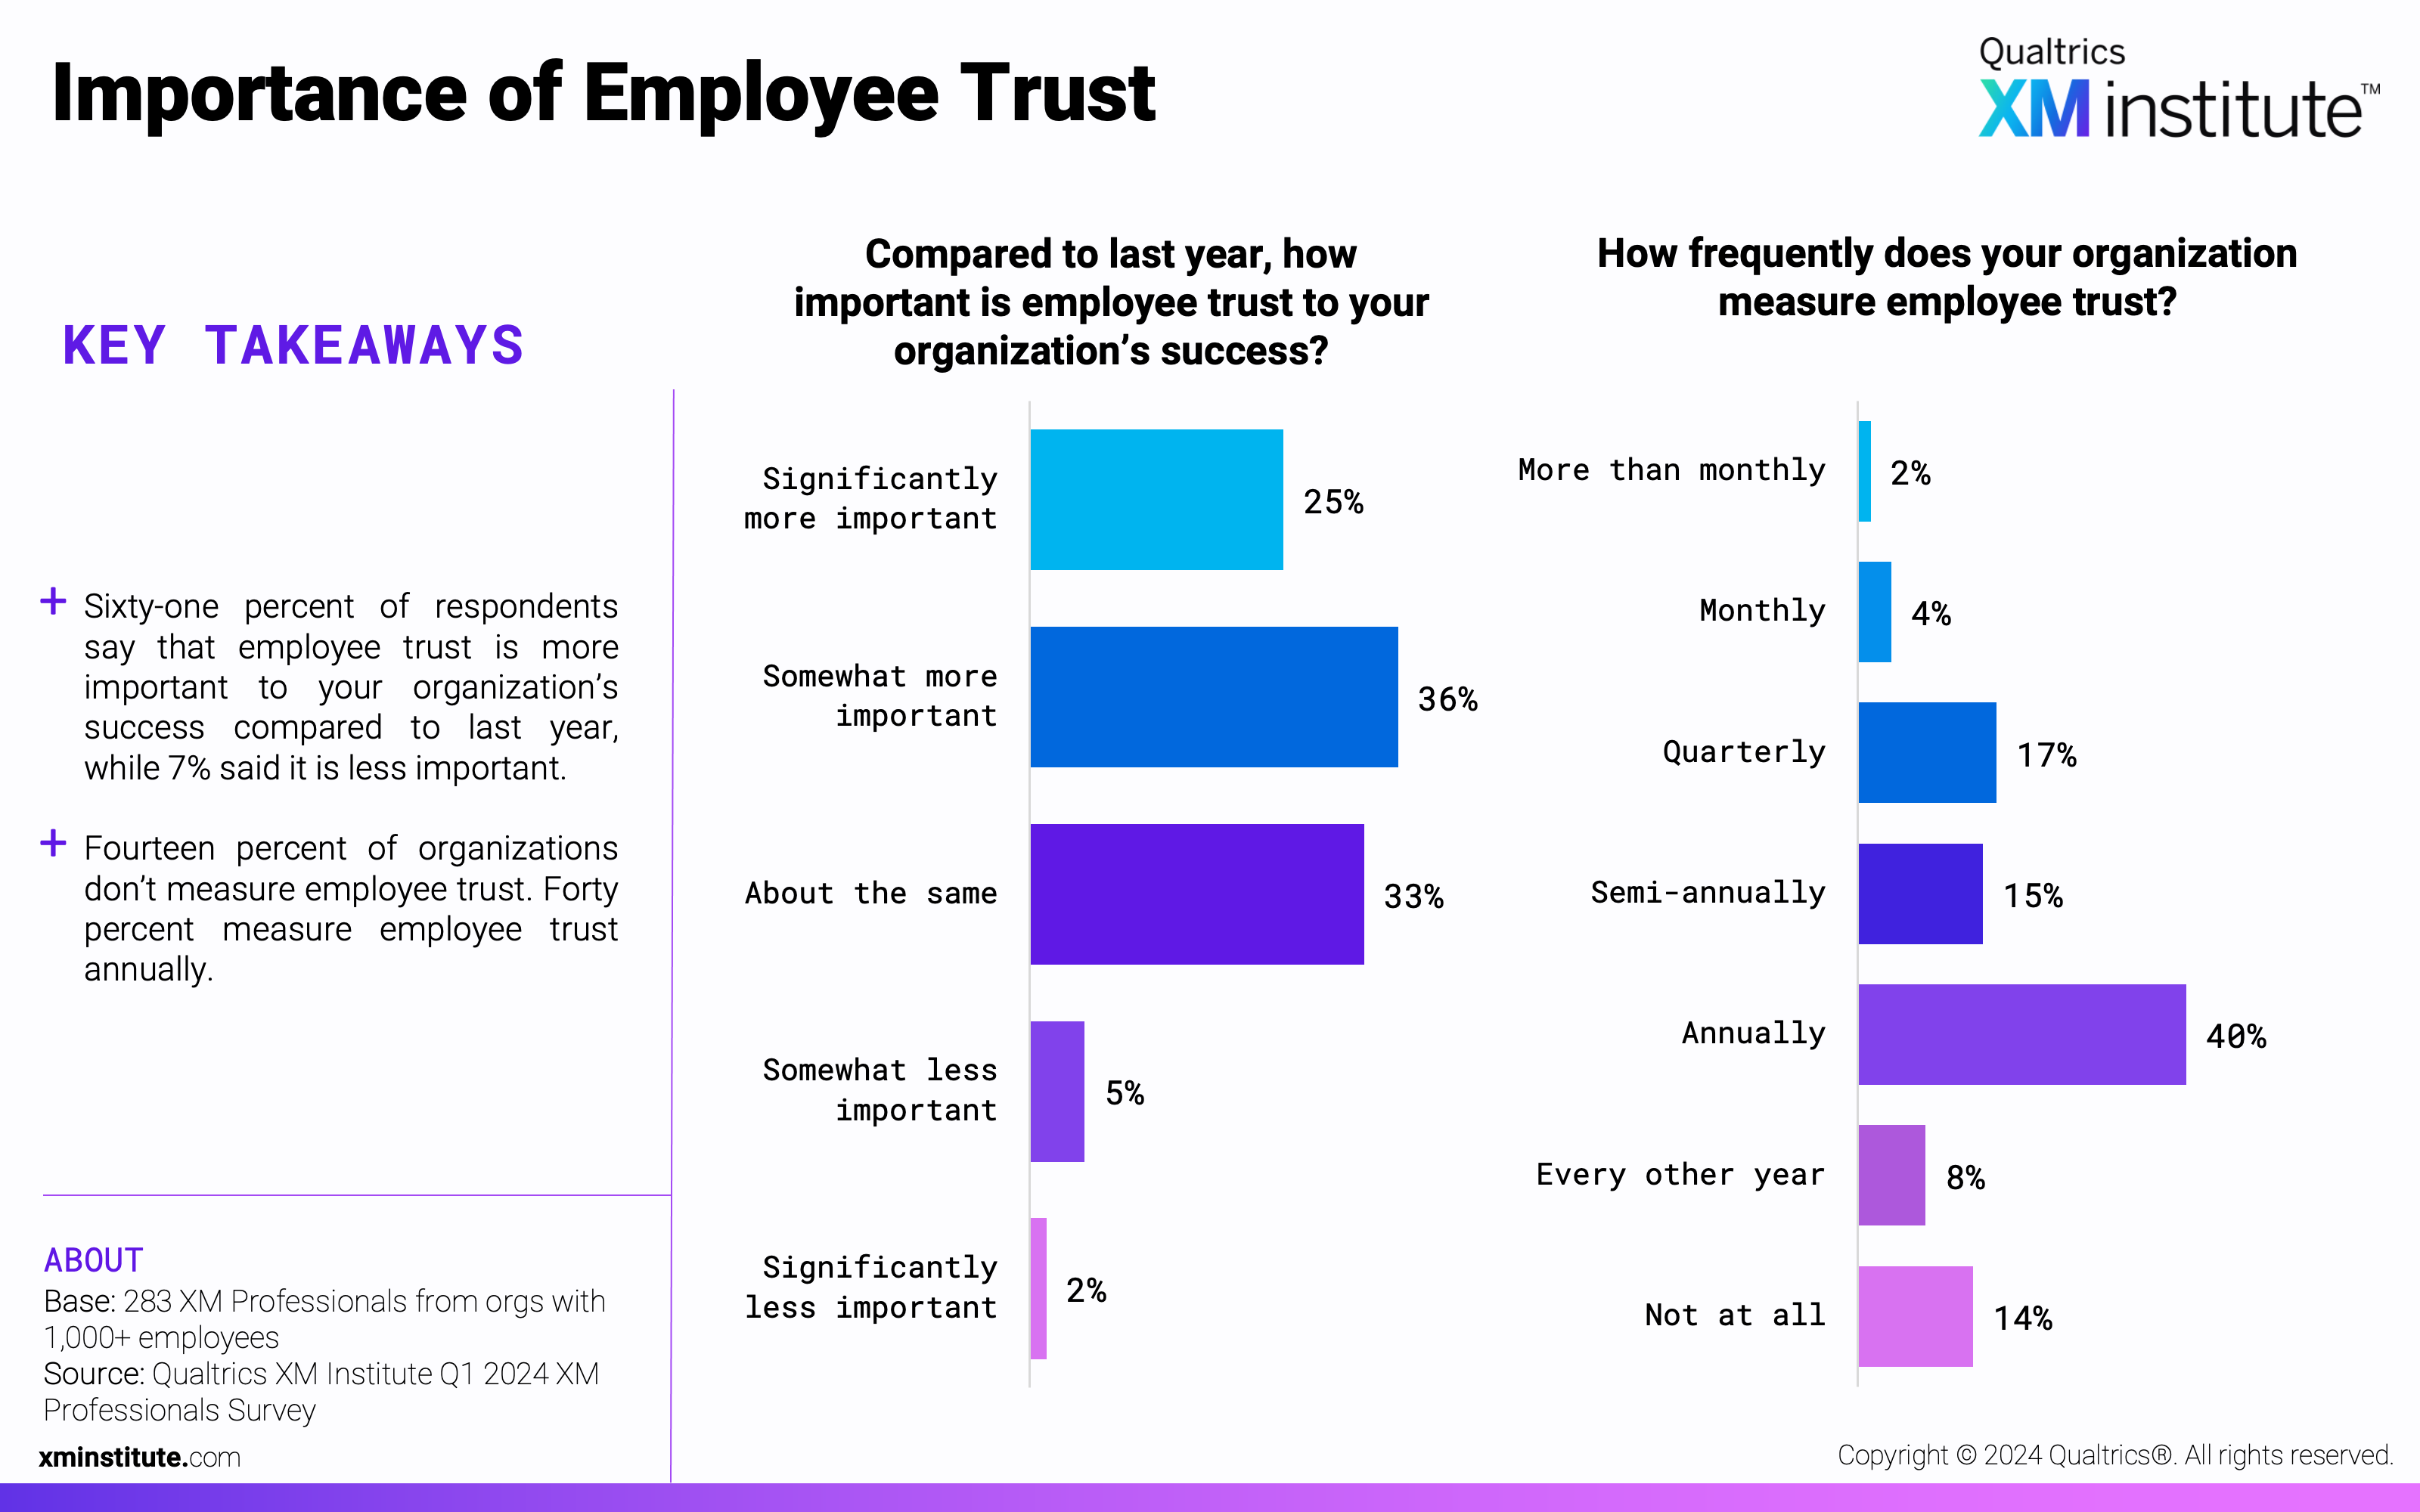 These charts show how much more important employee trust is to respondents' organizations' success, and how frequently they measure employee trust. 